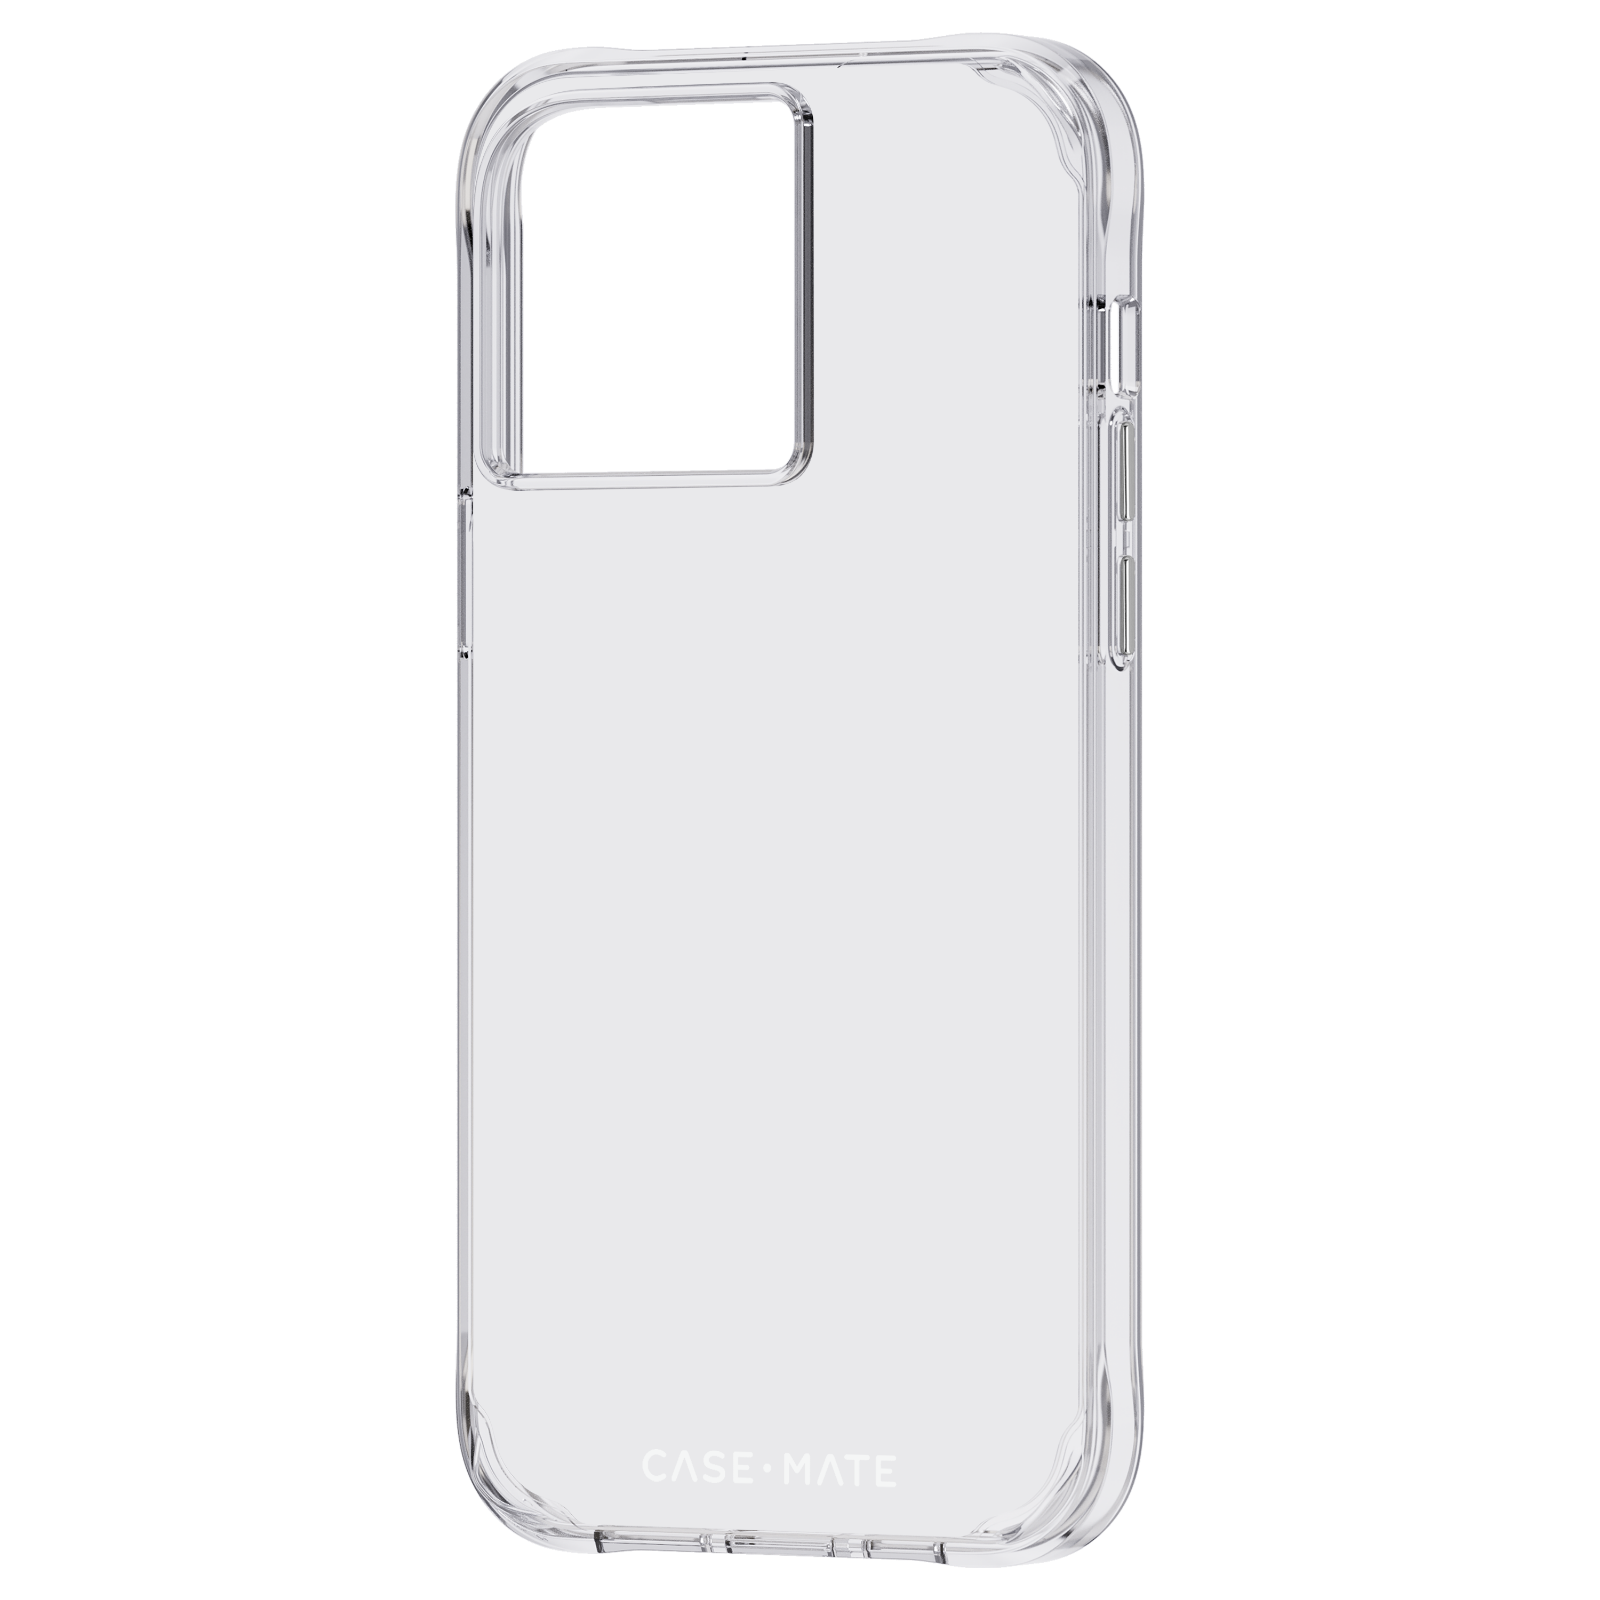 CASE-MATE Pro 14 Backcover, Clear, Apple, iPhone Max, Tough Transparent